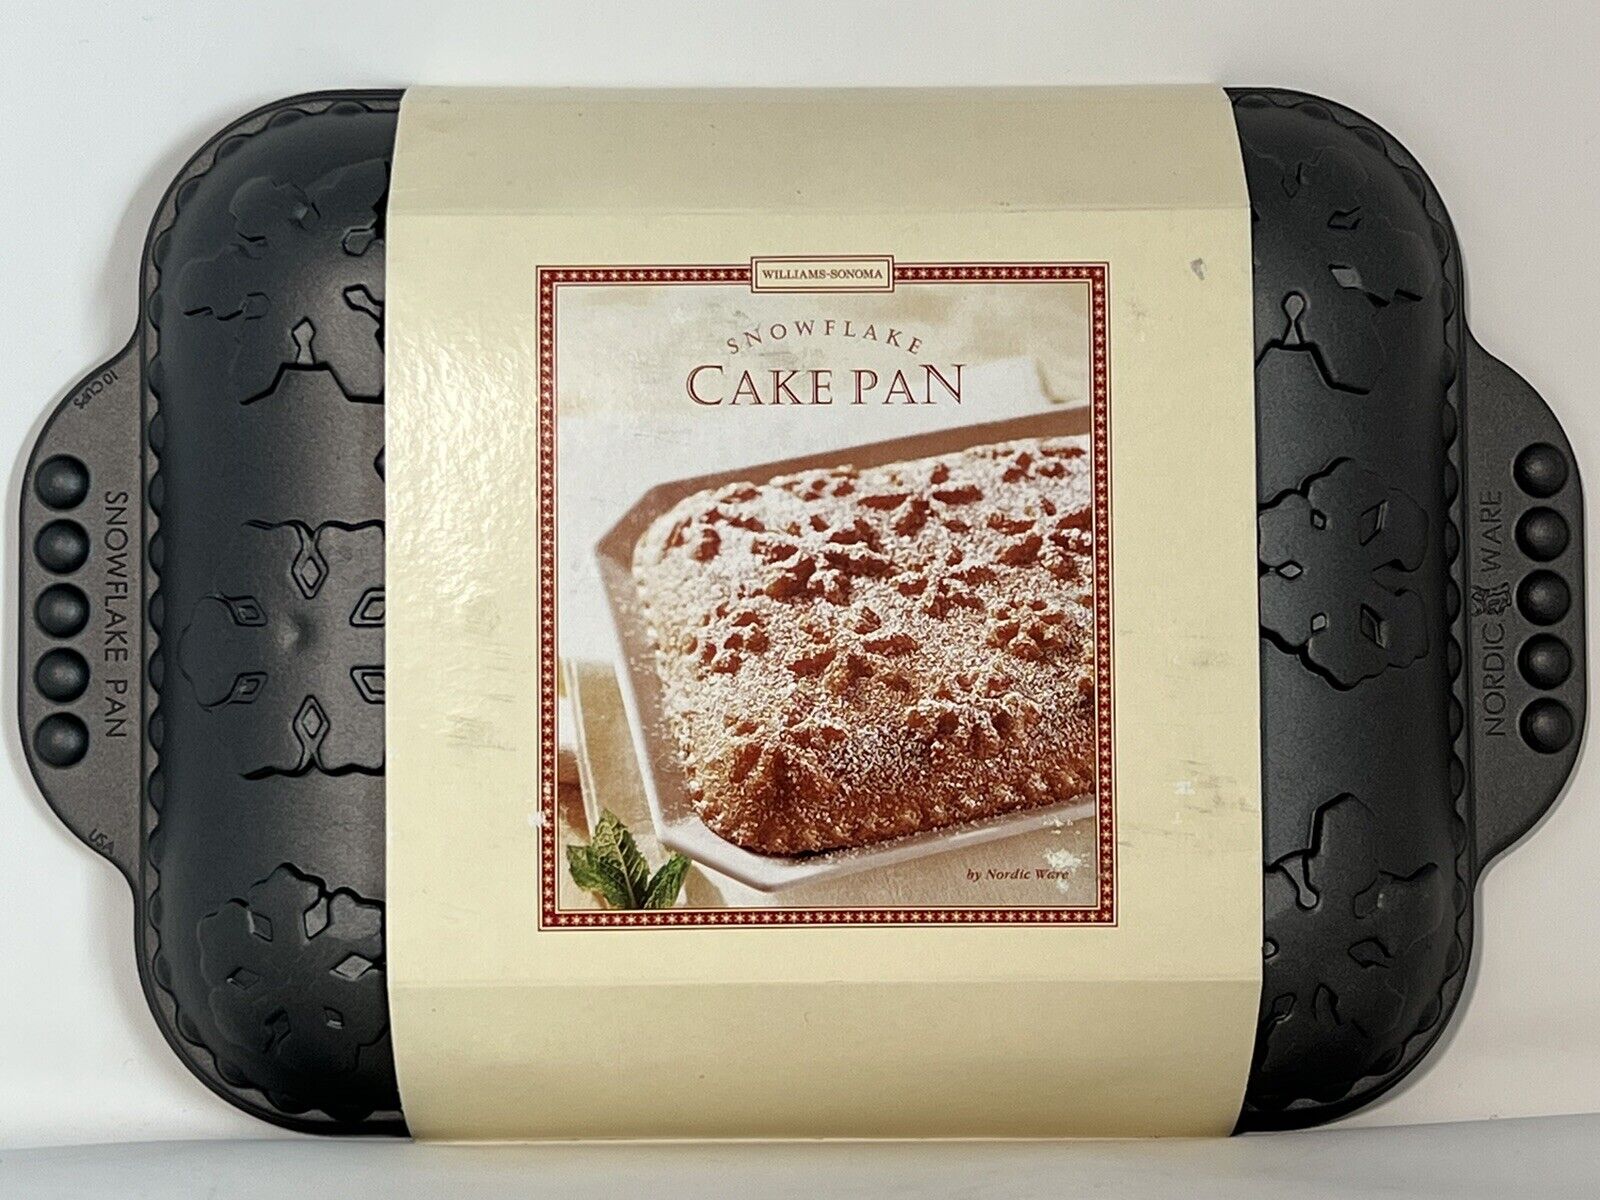 Williams Sonoma Snowflake Cake Pan Made by Nordic Ware Cast